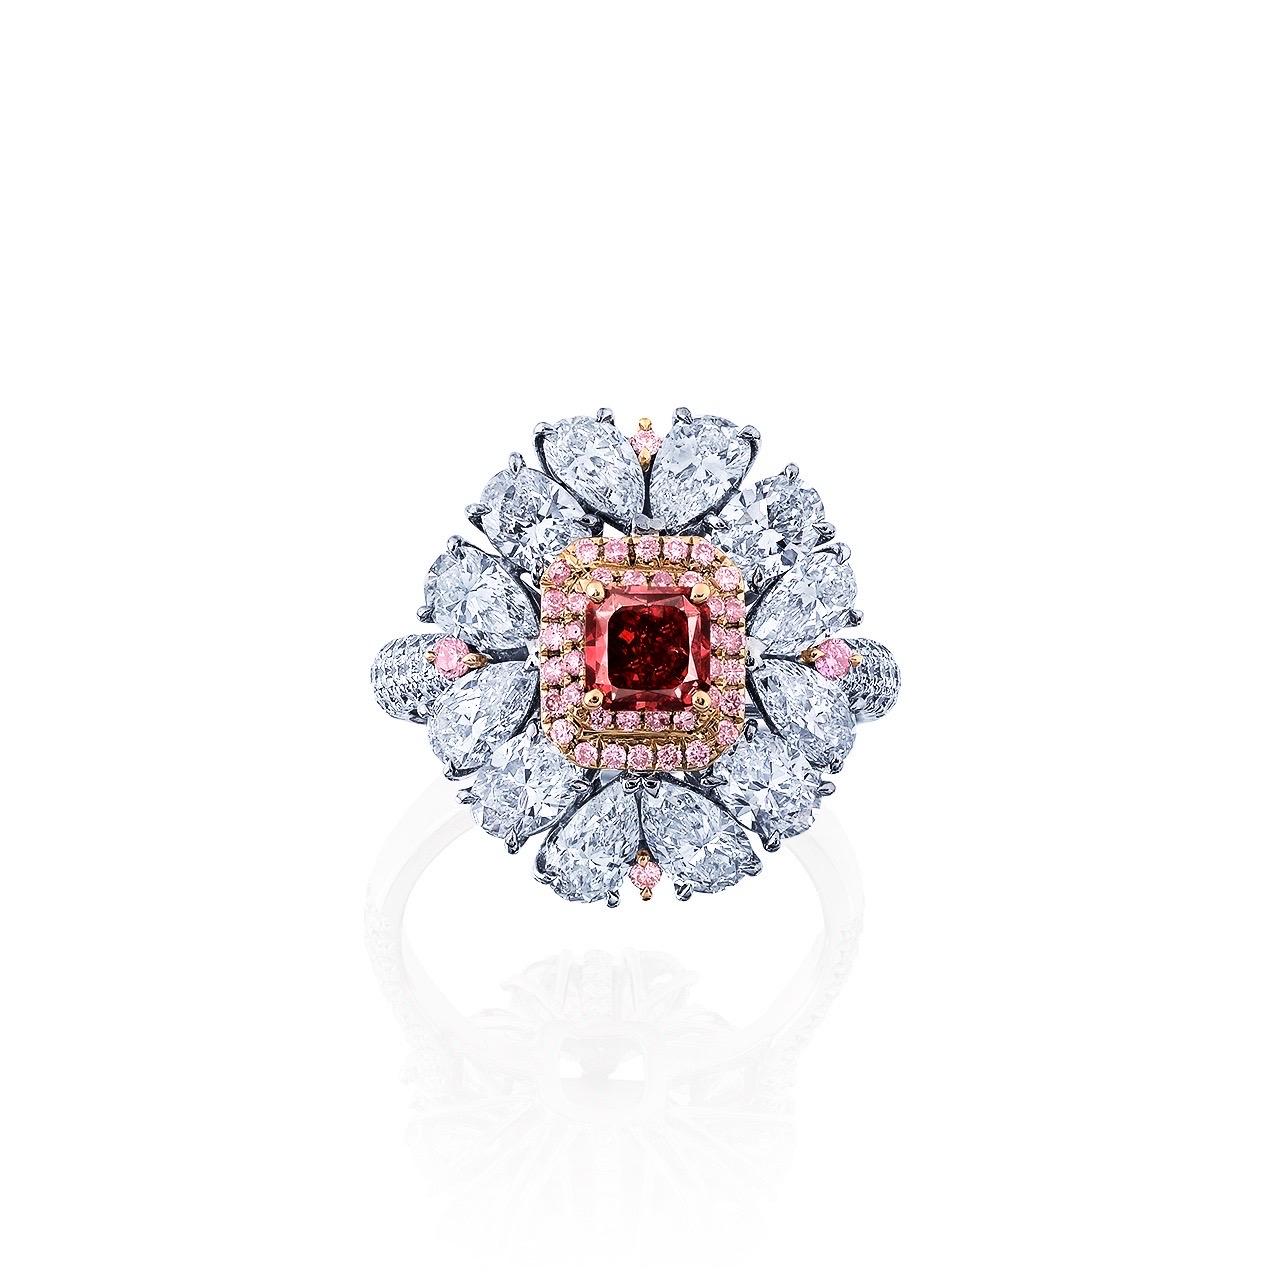 Main stone: just over 0.50 carat Fancy Red,
 Cut-Cornered Square
Setting: 58 round white diamonds totaling approximately 0.39 carats, 8 pear-cut white diamonds totaling approximately 1.88 carats, 4 oval-cut white diamonds totaling approximately 0.95